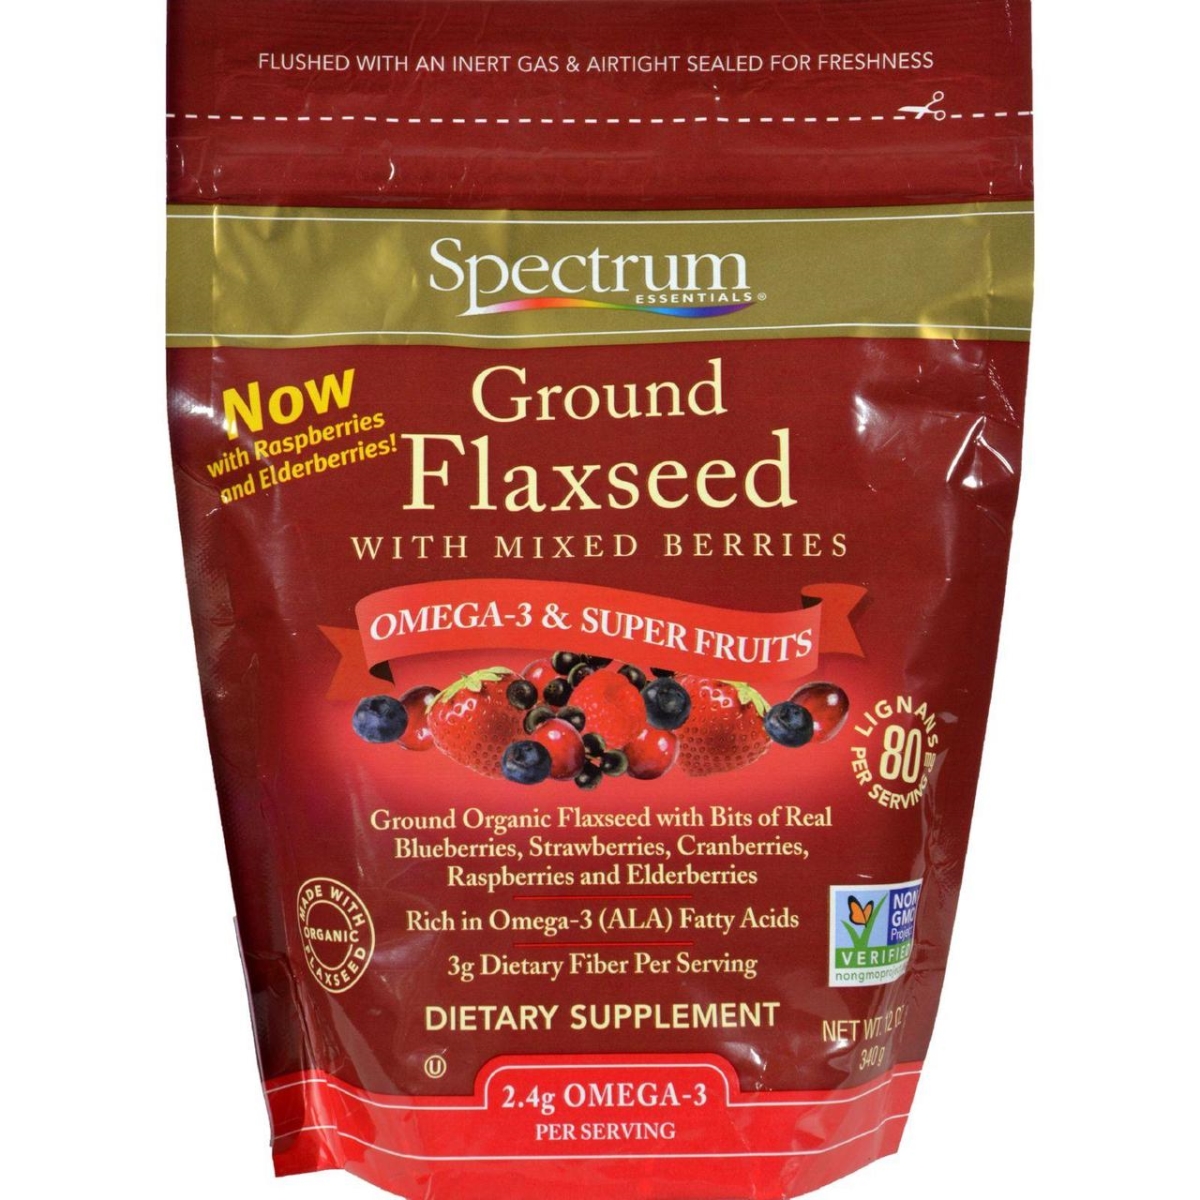 Hg0821504 12 Oz Ground Flax With Mixed Berries